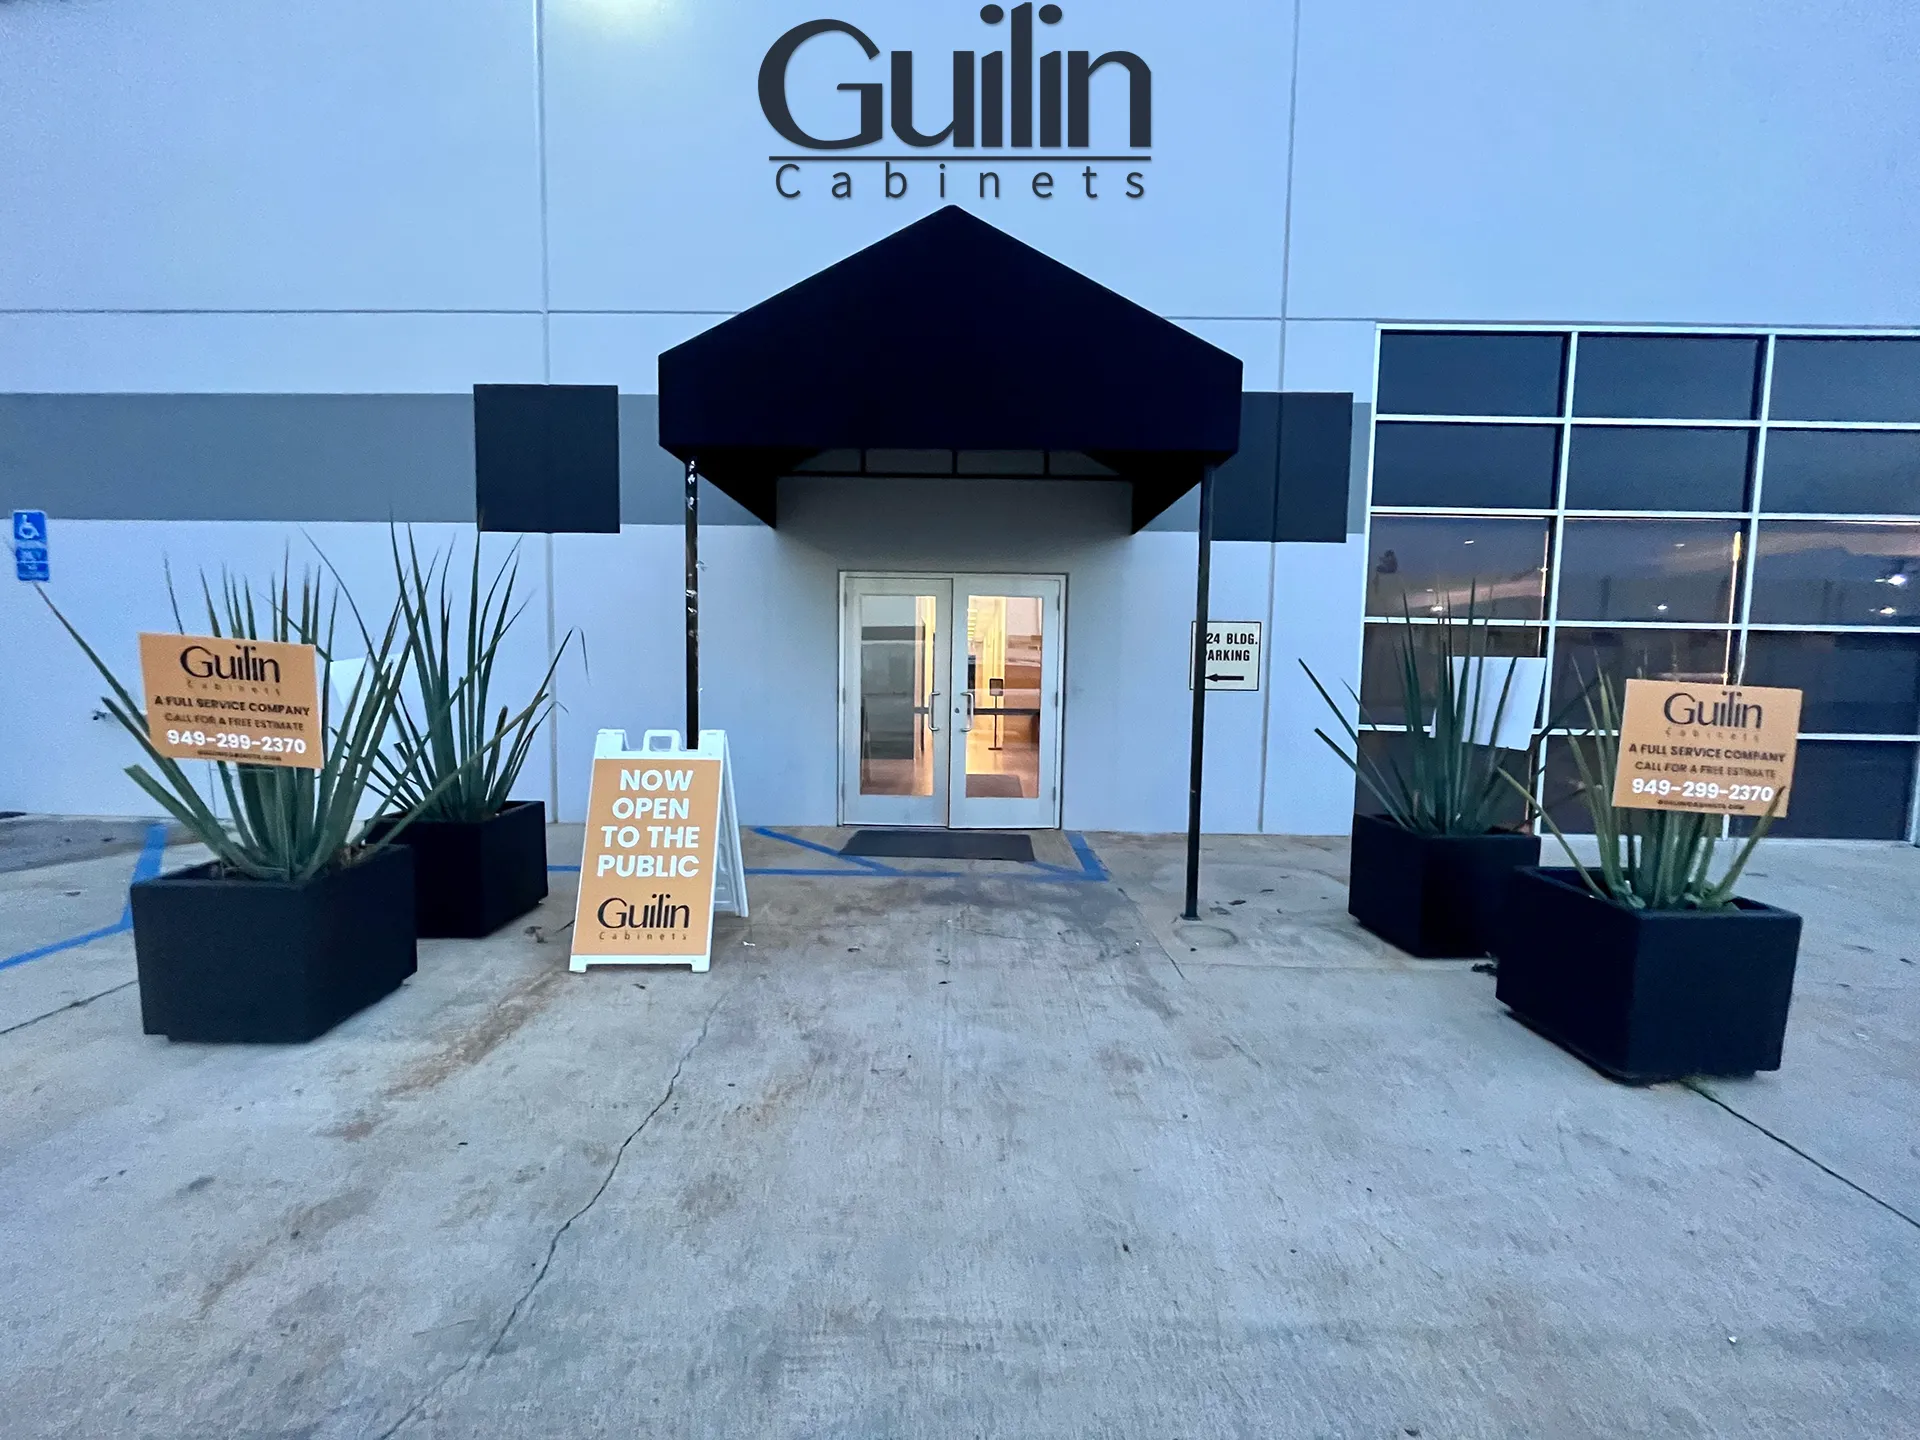 Guilin Cabinets Showroom is located at 1924 Barranca Pkwy, Irvine, CA 92606